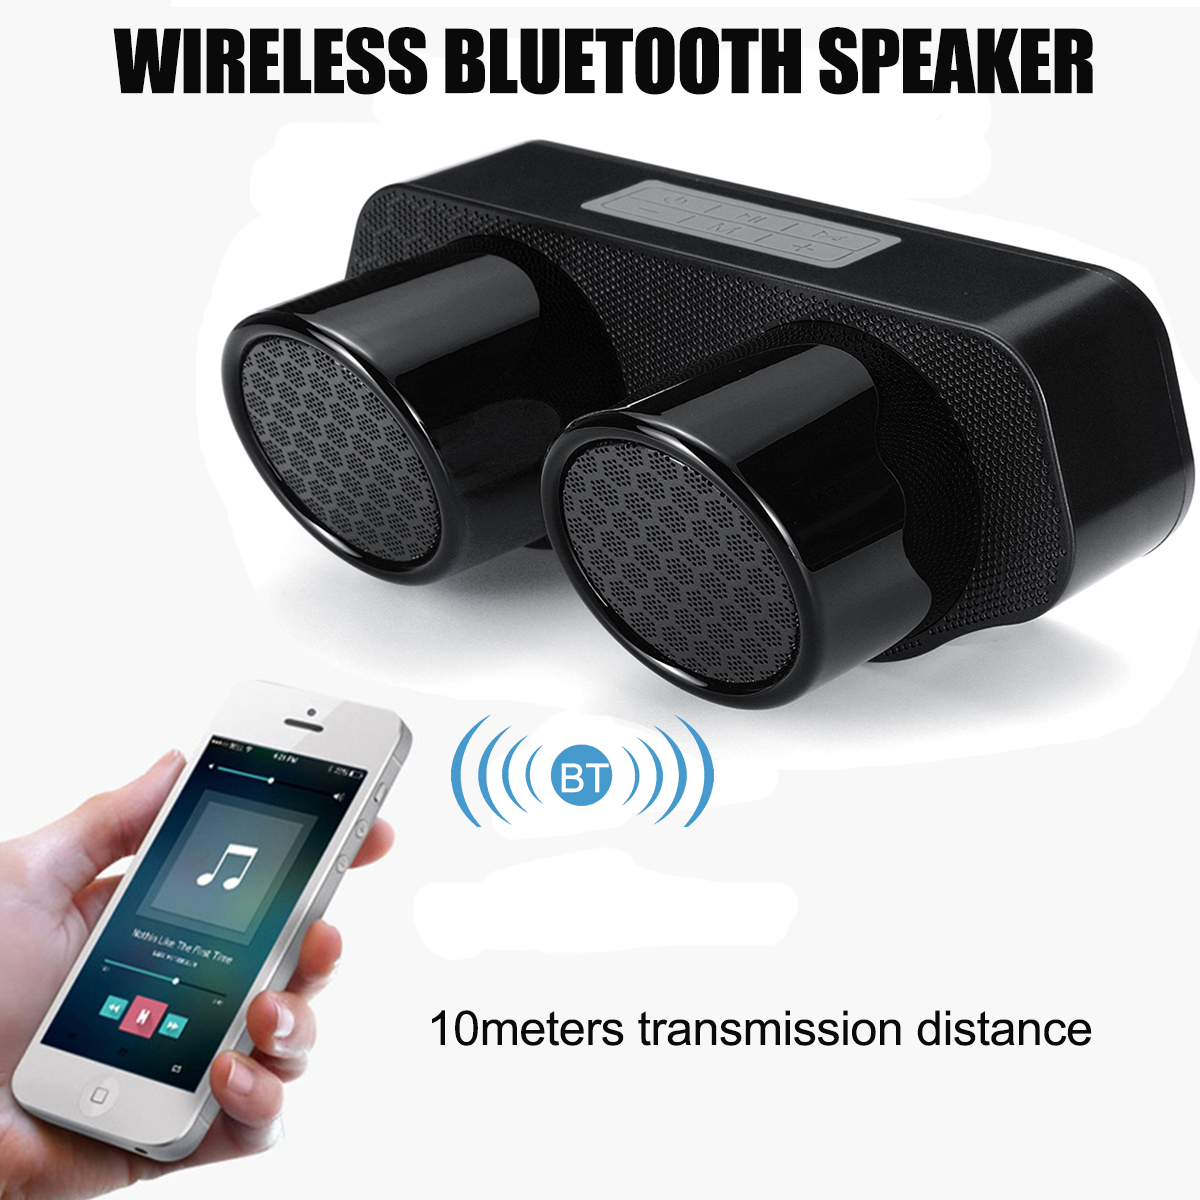 Rechargeable-Portable-Wireless-bluetooth-Speaker-FM-Radio-TF-Card-CSR50-Super-Bass-Sound-Stereo-Spea-1427727-3